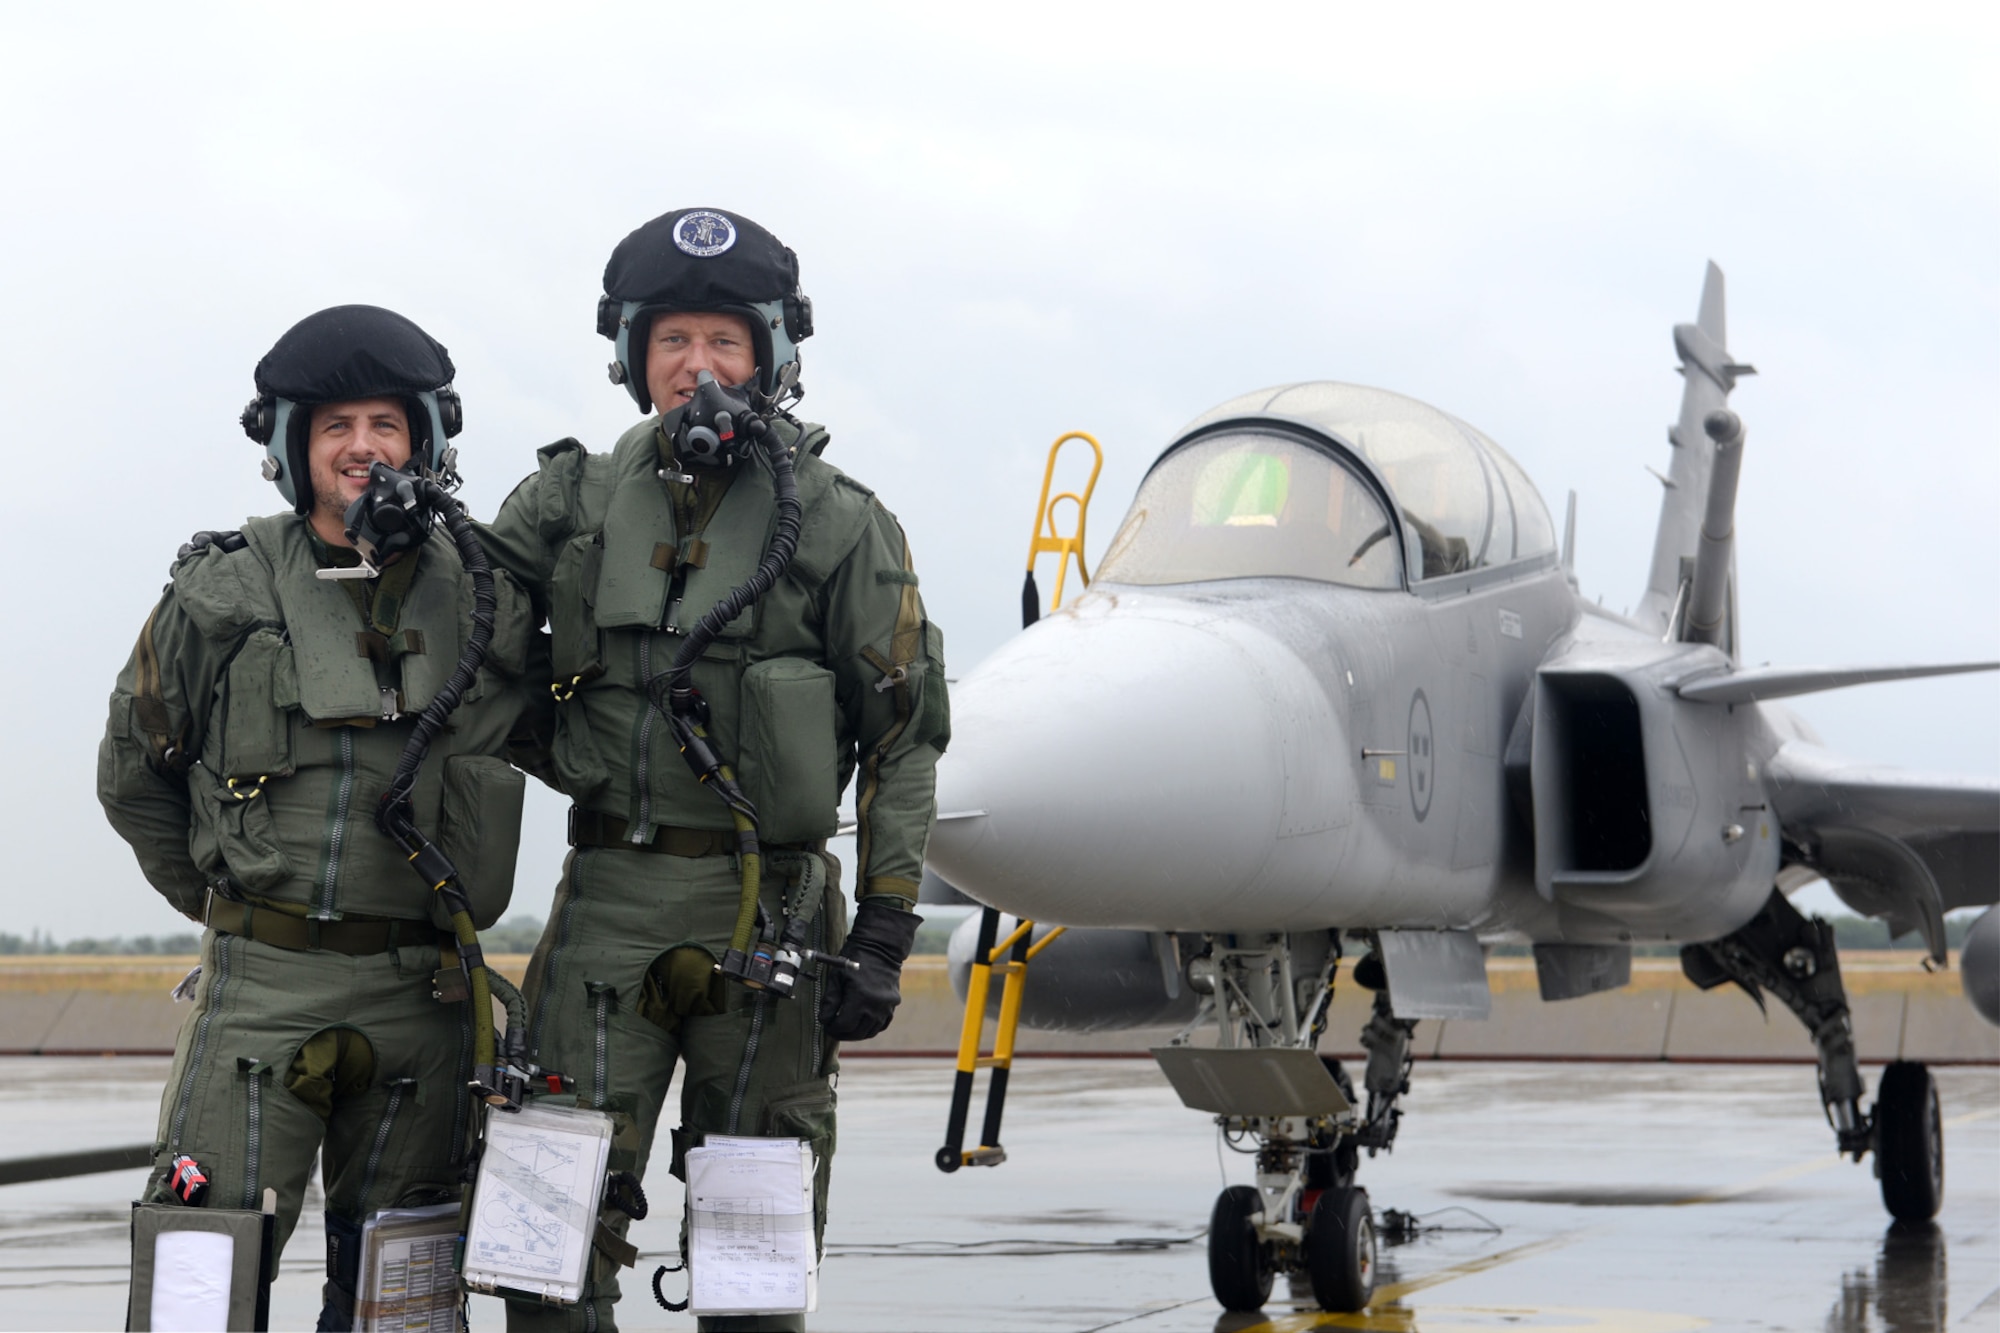 A Hungarian air force JAS-39 Gripen pilot, left, and Swedish air force Capt. Fredrik Borgsrtöm, Swedish AF Gripen Operational Testing and Evaluation instructor pilot, pose for a photo after completing the first air refueling training sortie in Hungarian history June 24, 2015, during air refueling familiarization training on Kecskemét air base, Hungary. Hungarian, U.S. and Swedish air force personnel met for a two-week familiarization period enabling the Hungarian JAS-39 Gripen pilots to successfully perform air refueling for the first time. (U.S. Air Force photo by Senior Airman Kate Thornton/Released)